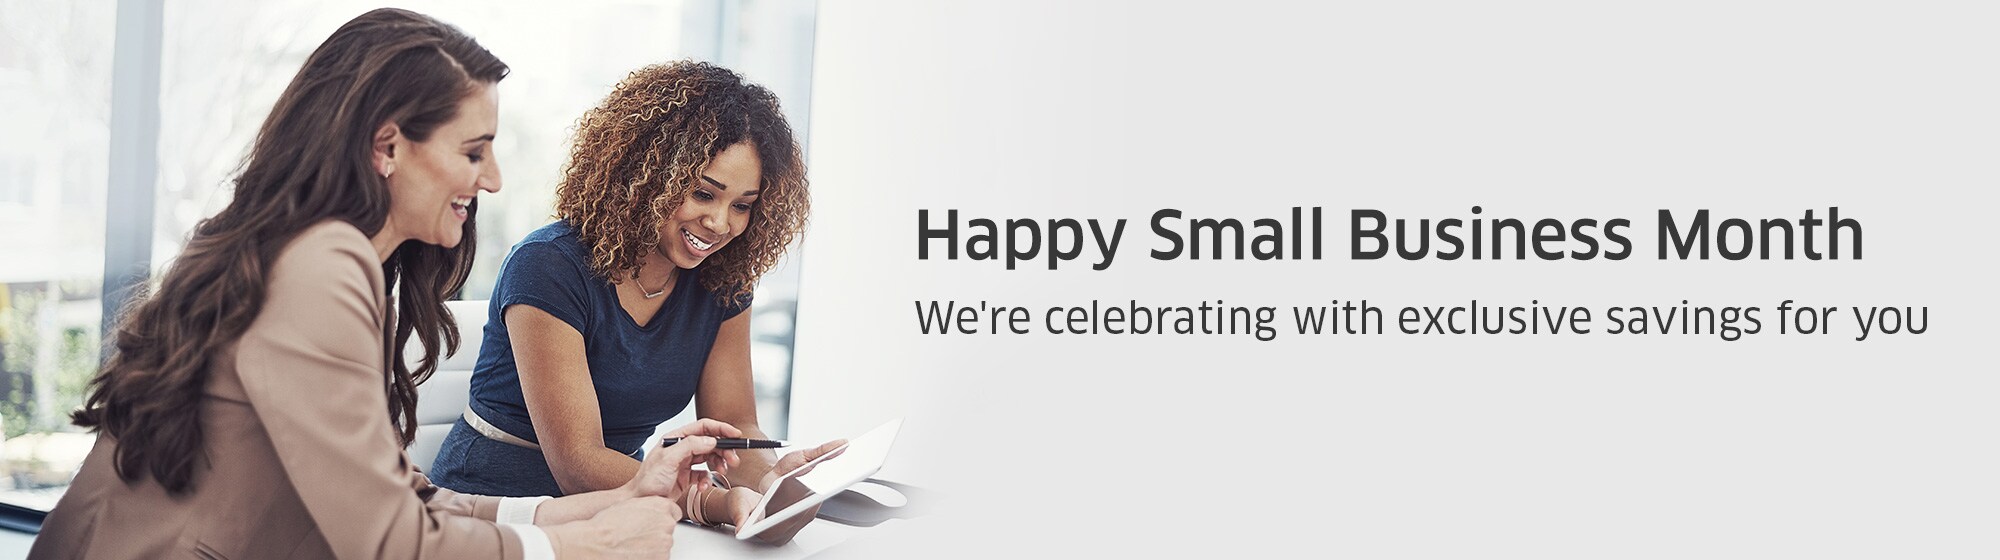 Happy Small Business Month! We're celebrating with exclusive savings for you